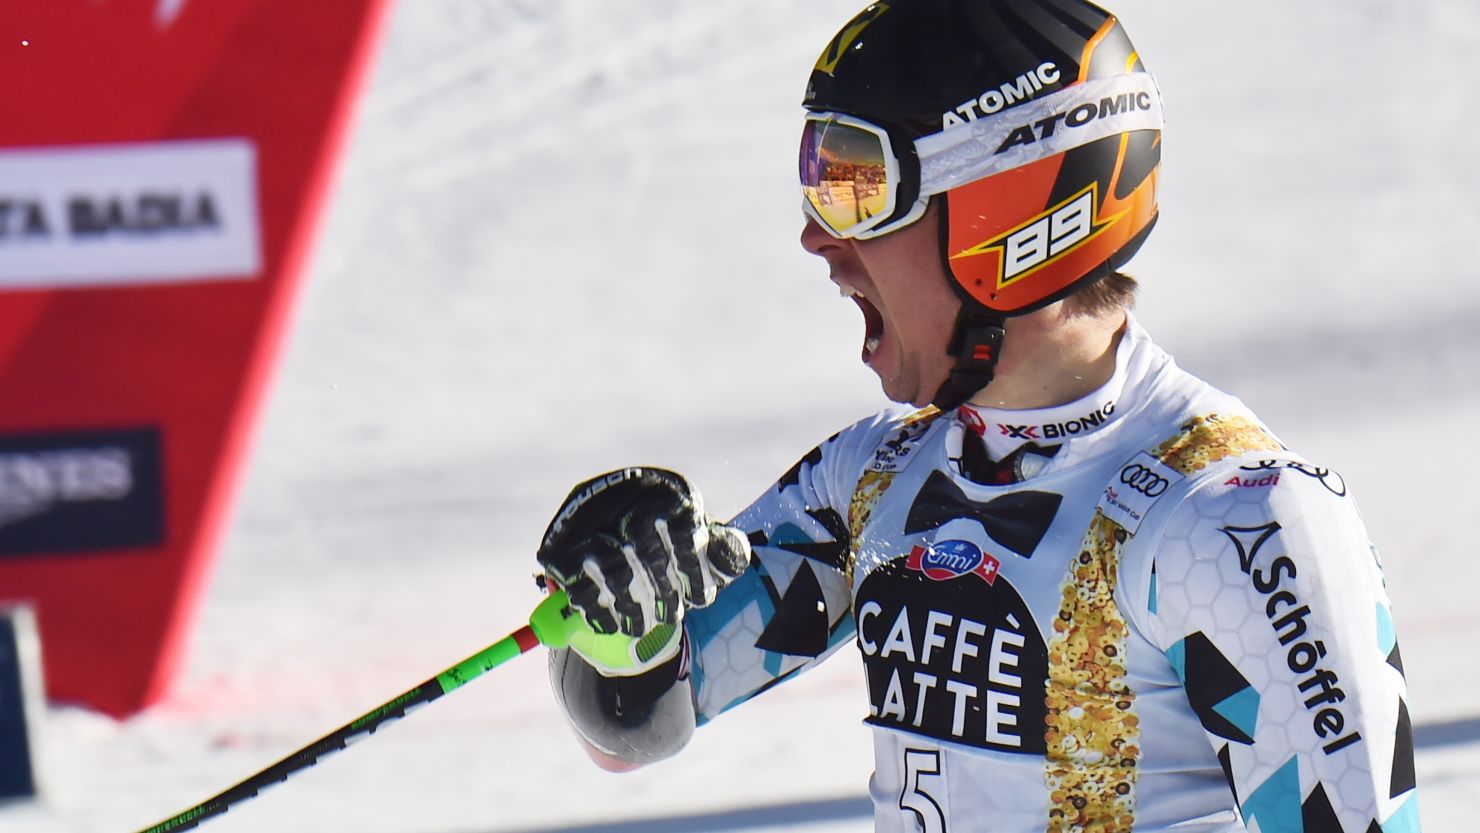 Marcel Hirscher claimed his first giant slalom victory of the season and his fourth straight at Alta Badia.